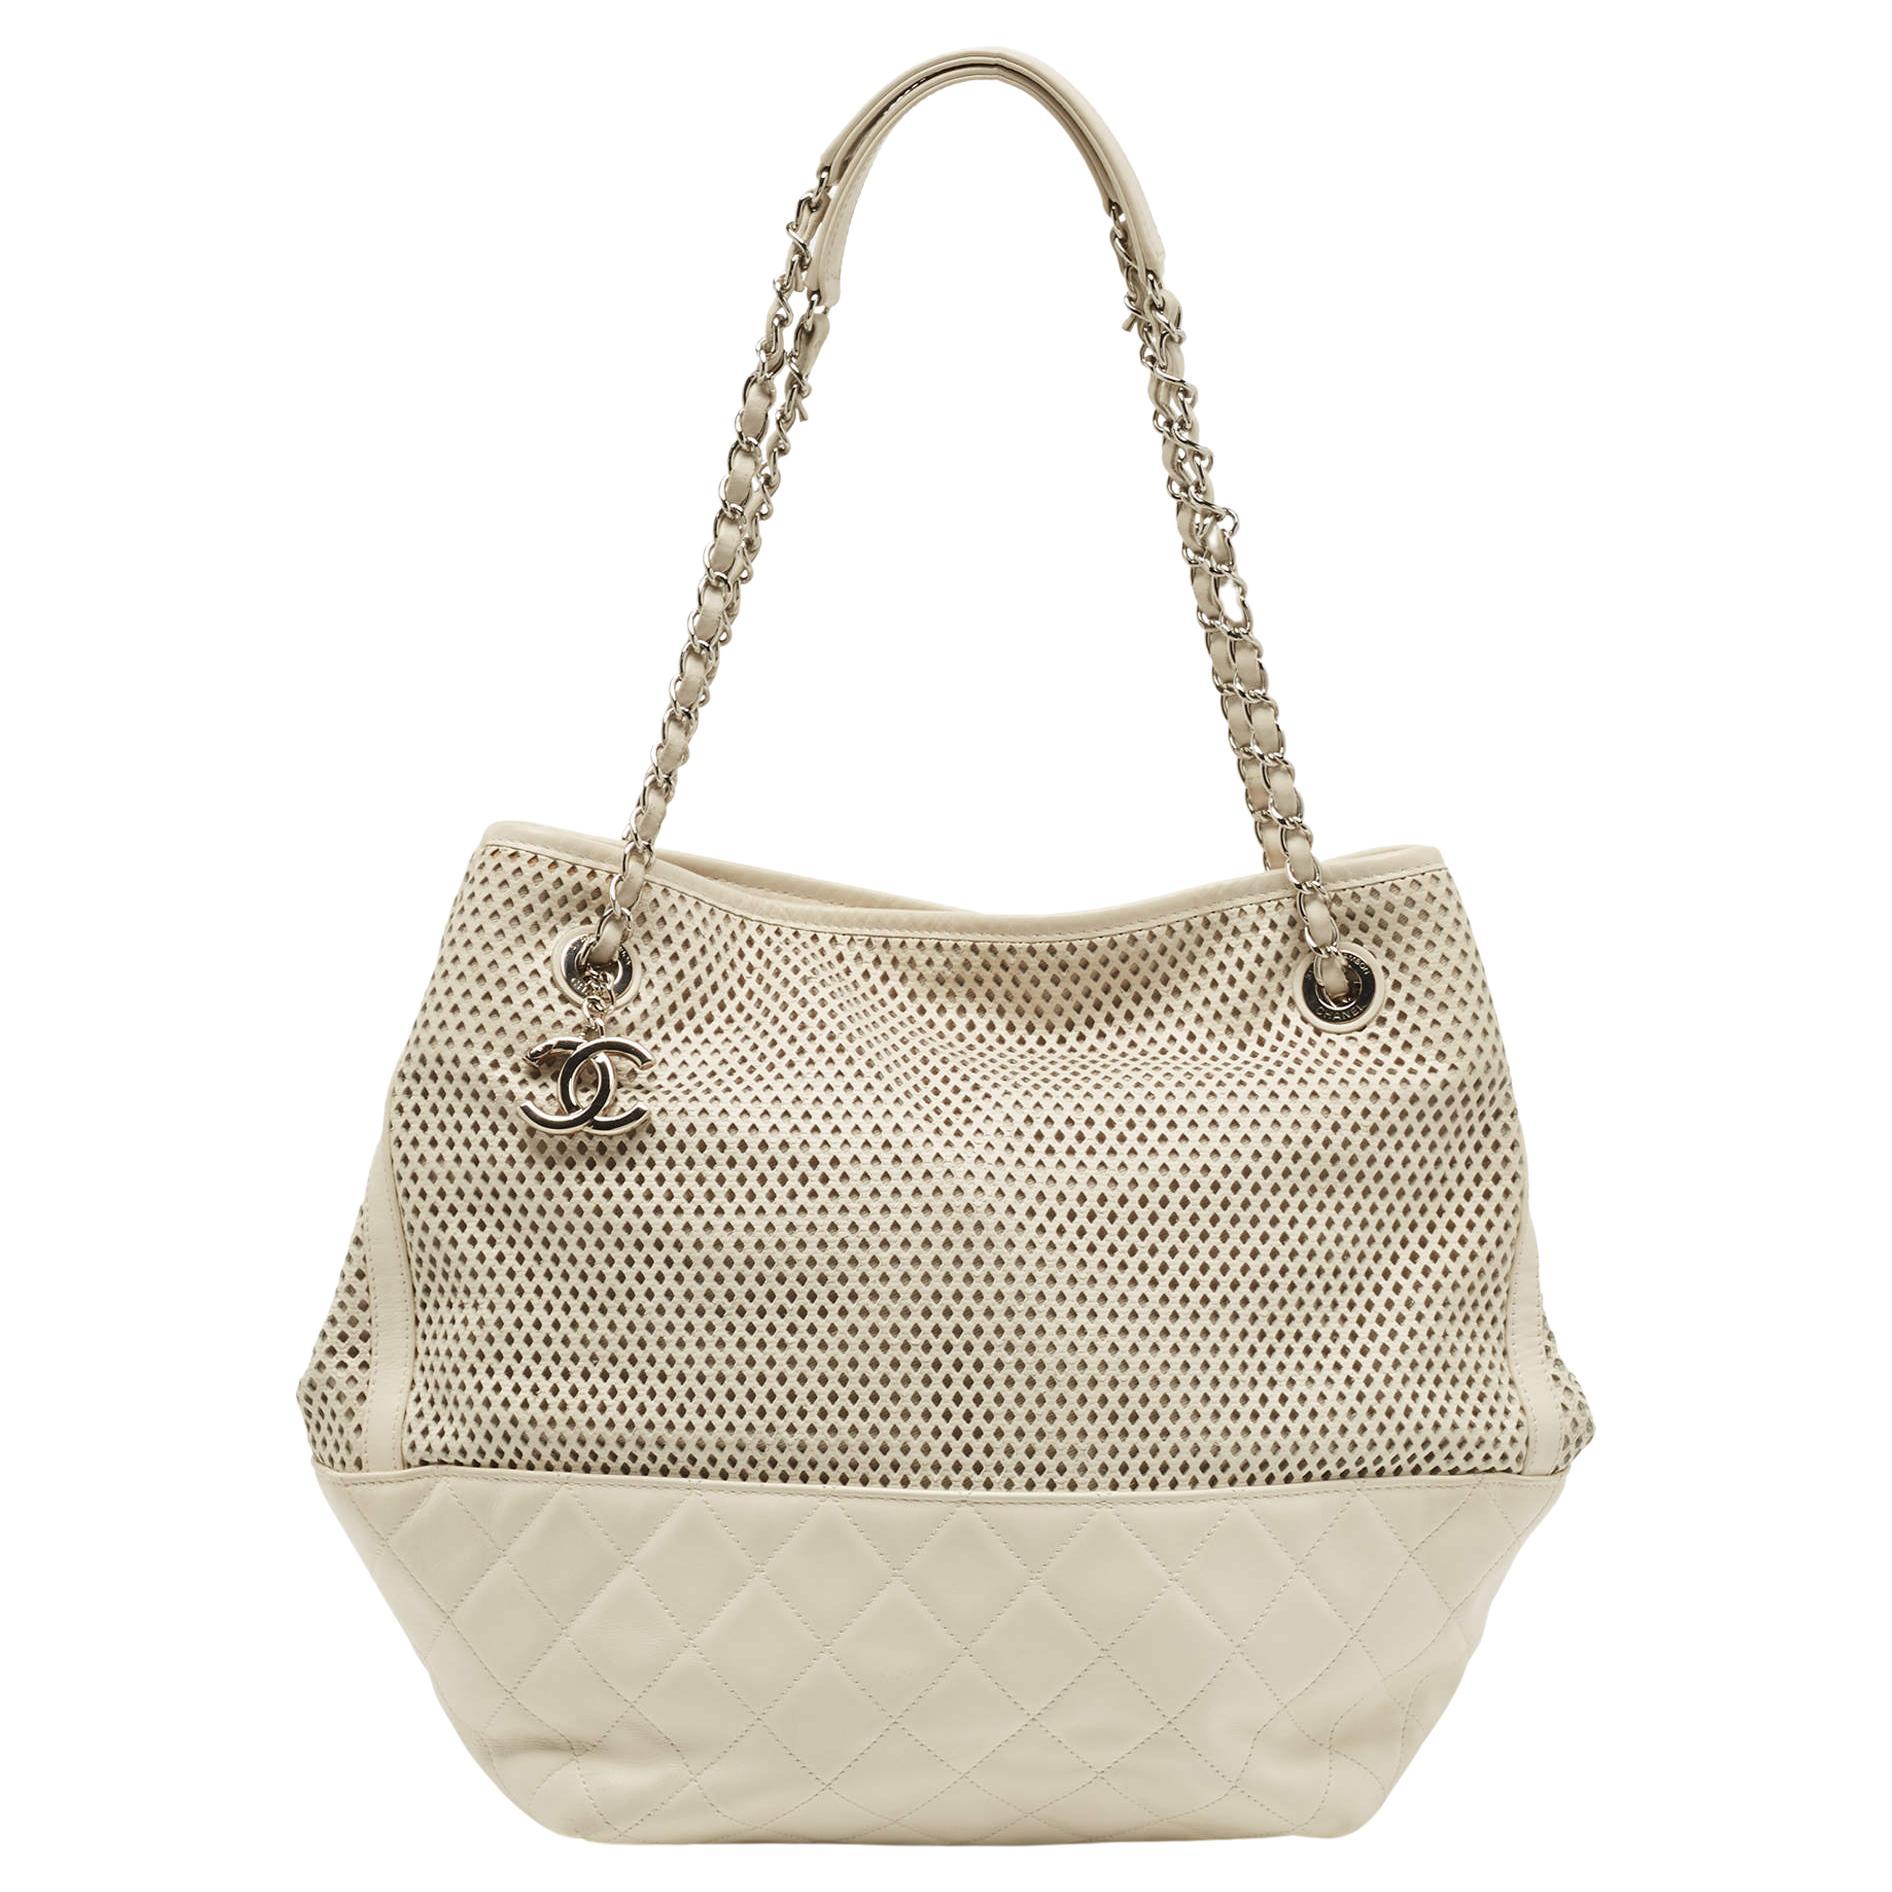 Chanel Cream Perforated Leather Up In The Air Tote